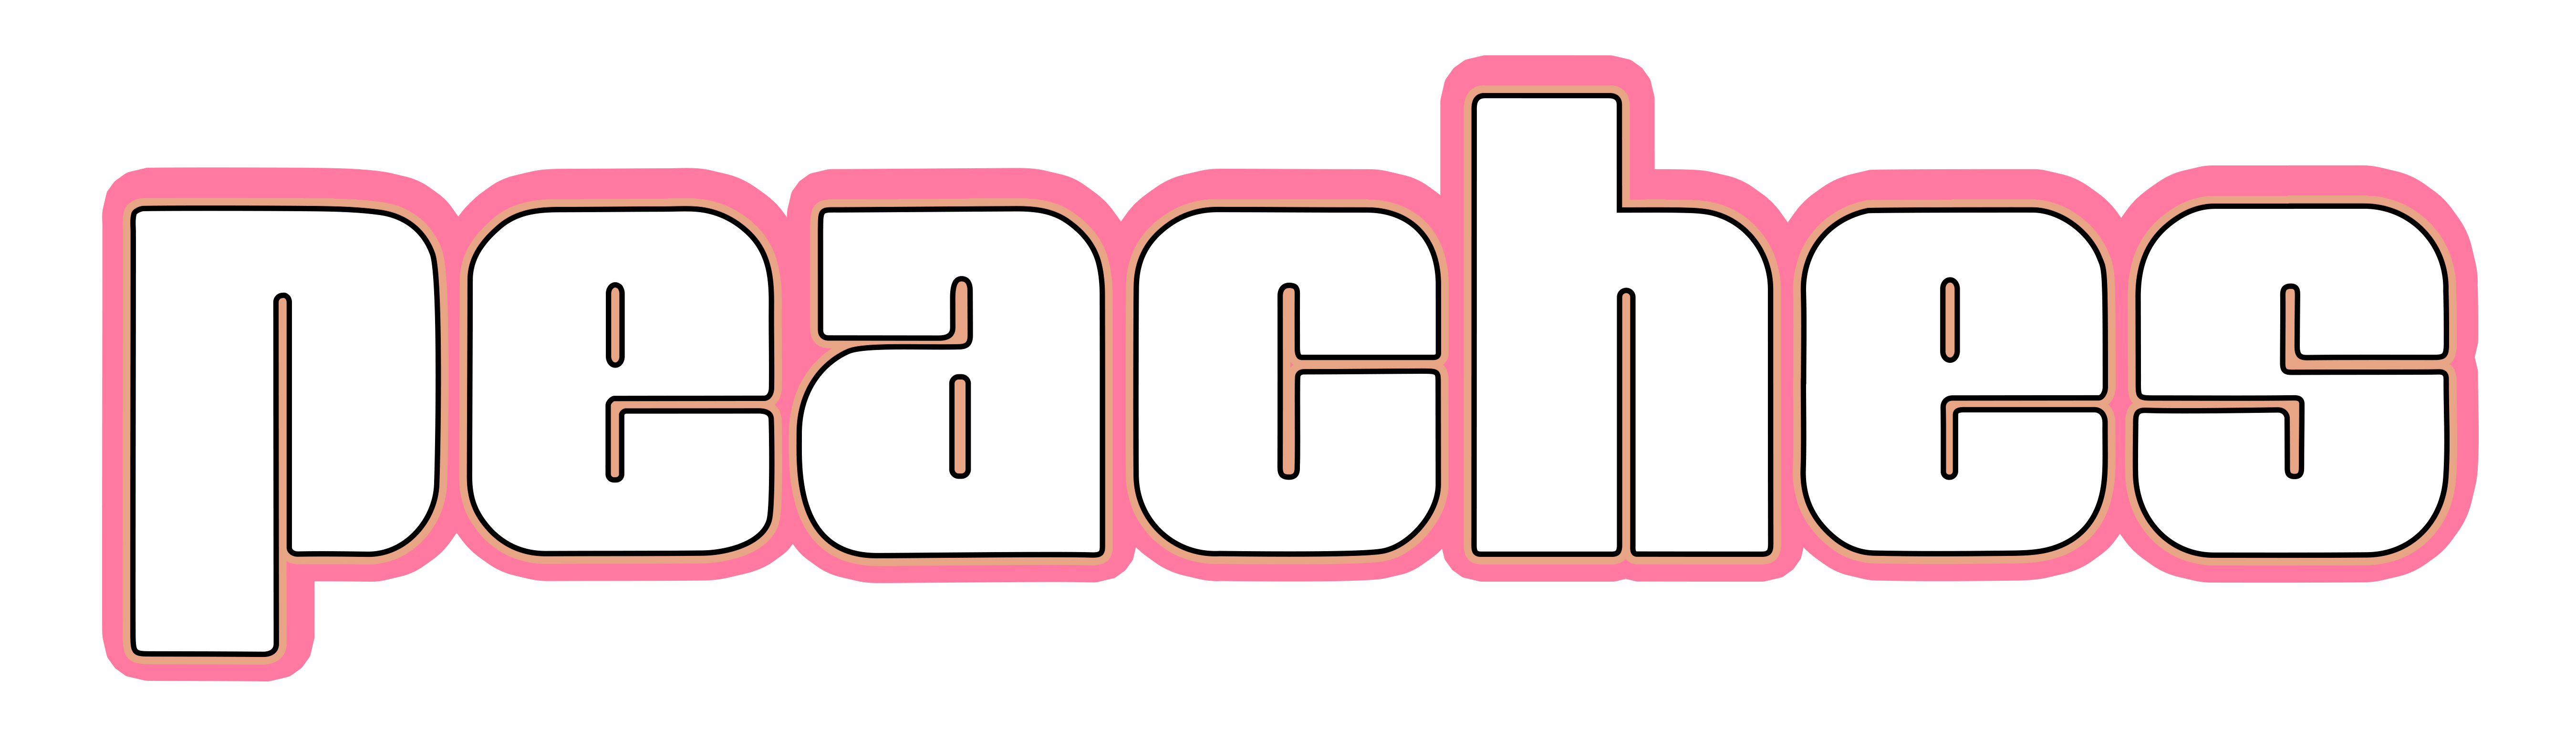 Peaches Official Website